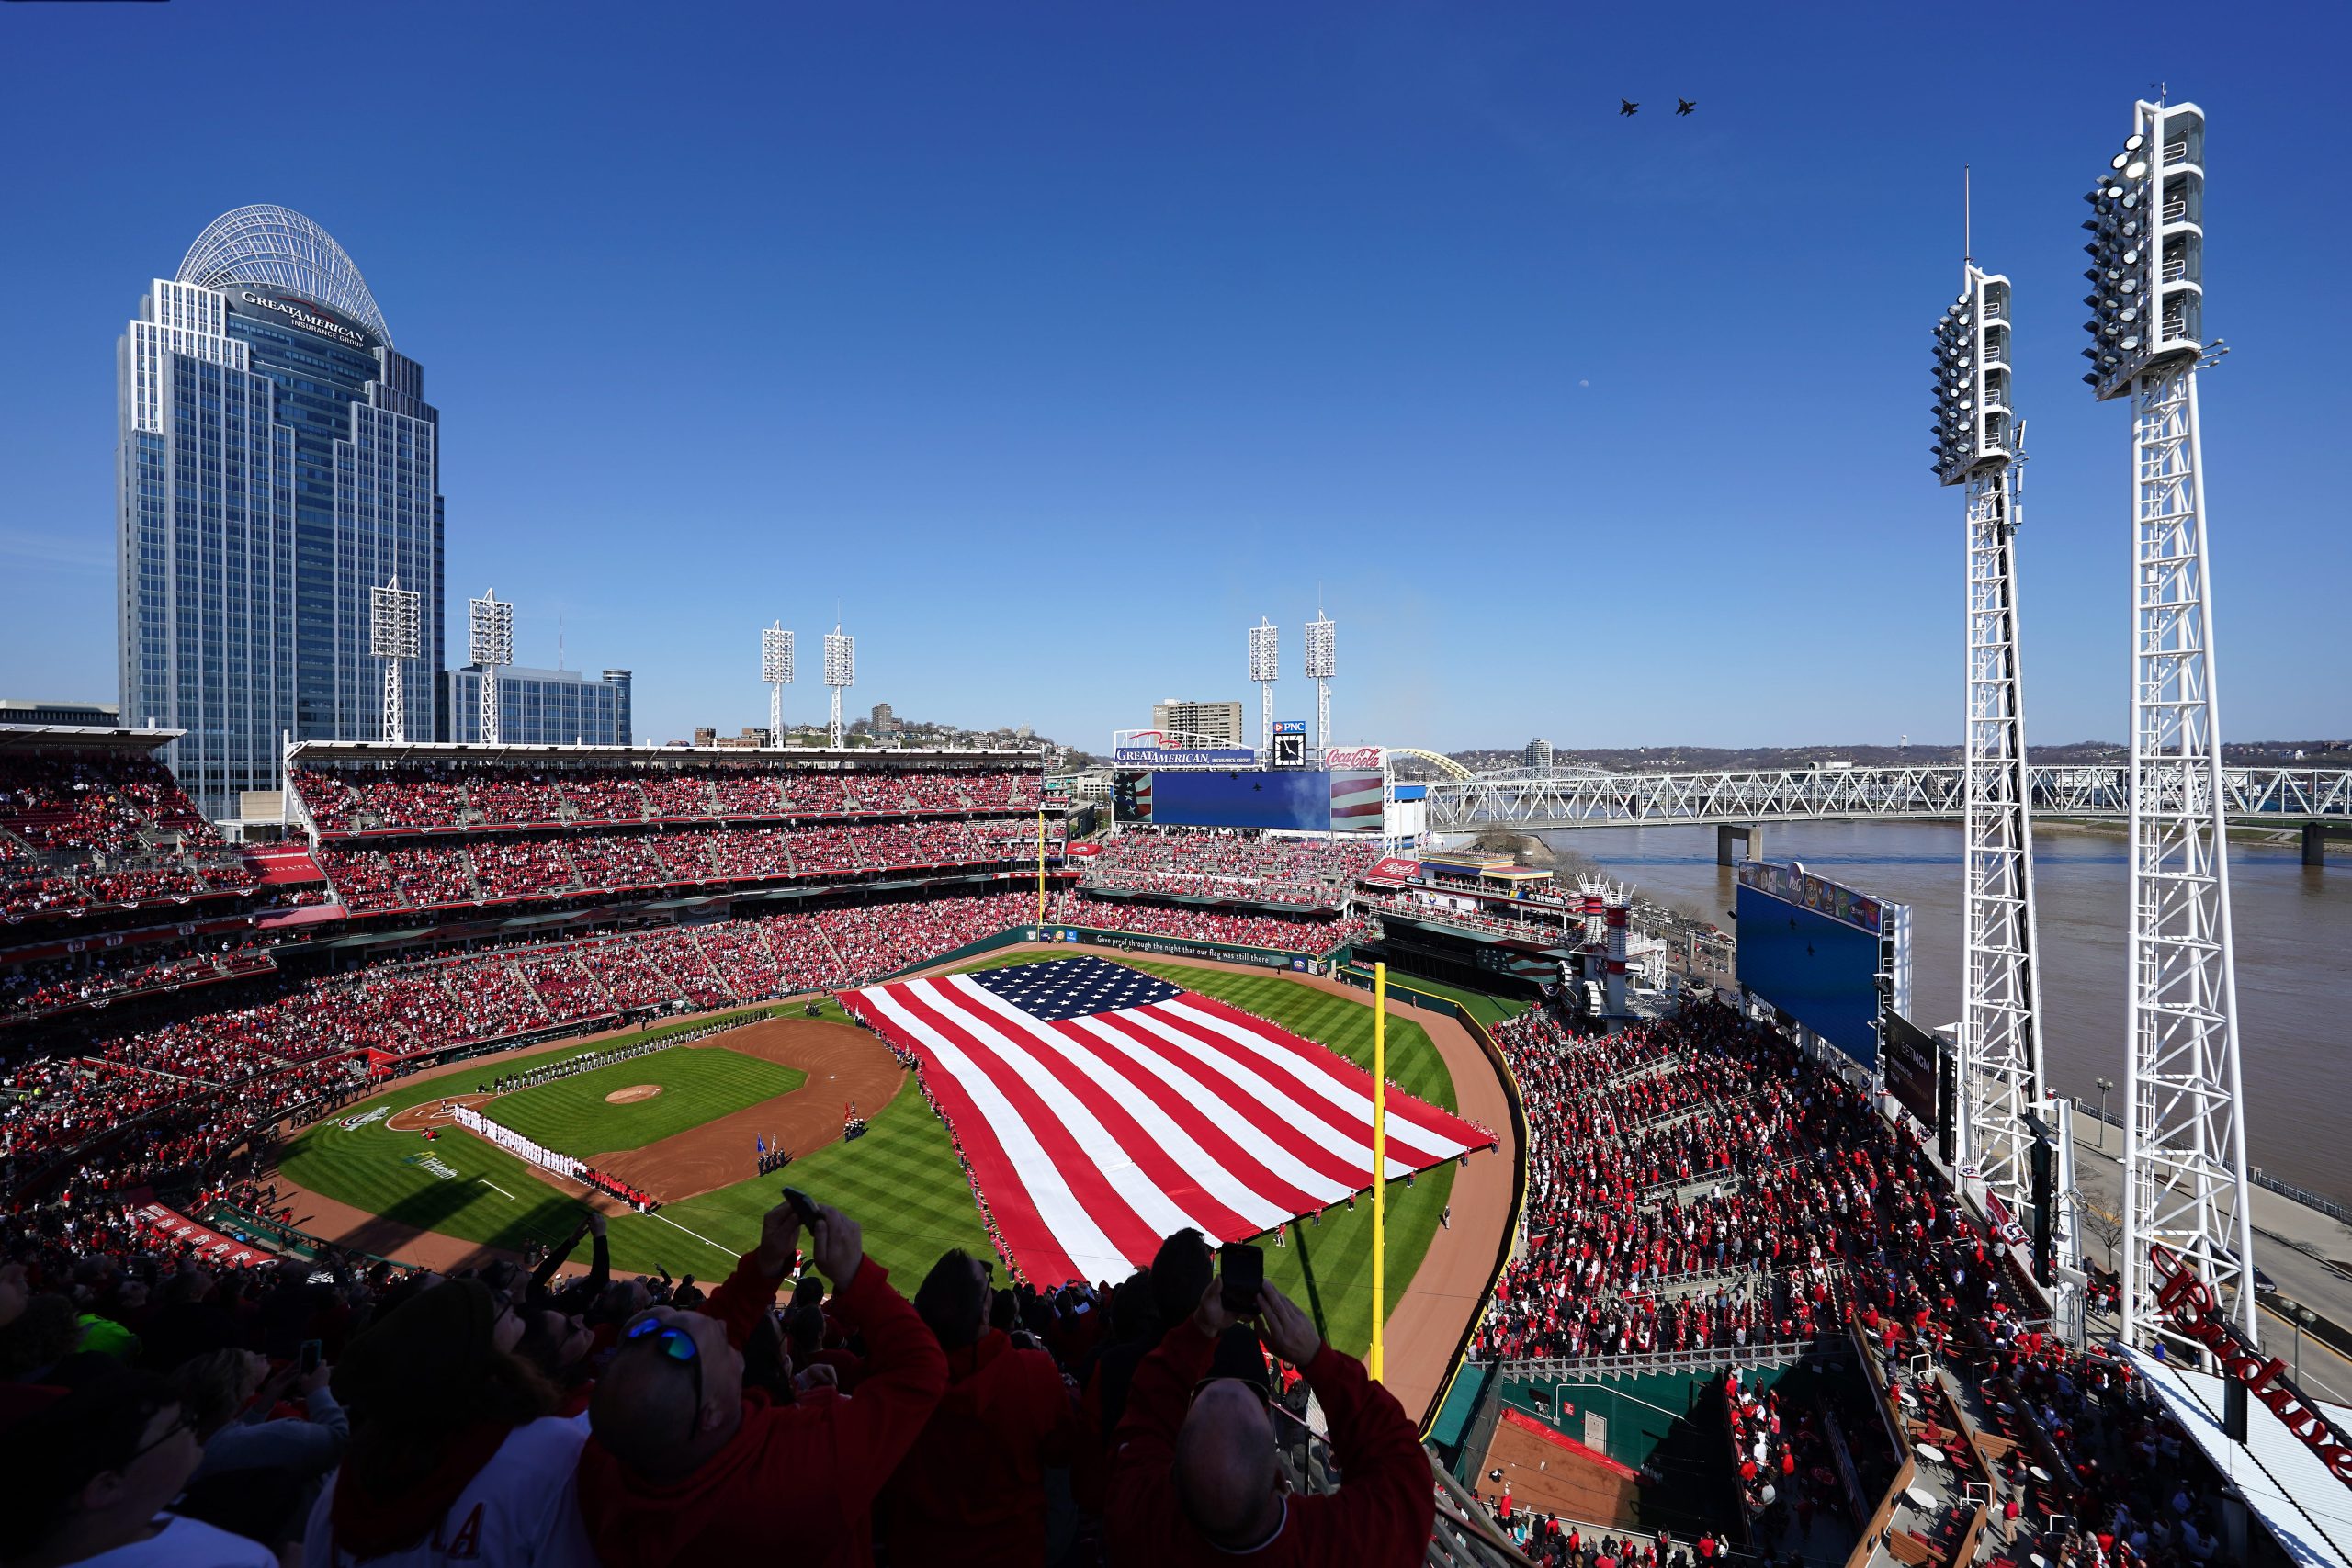 Ballparks Great American Ball Park - This Great Game